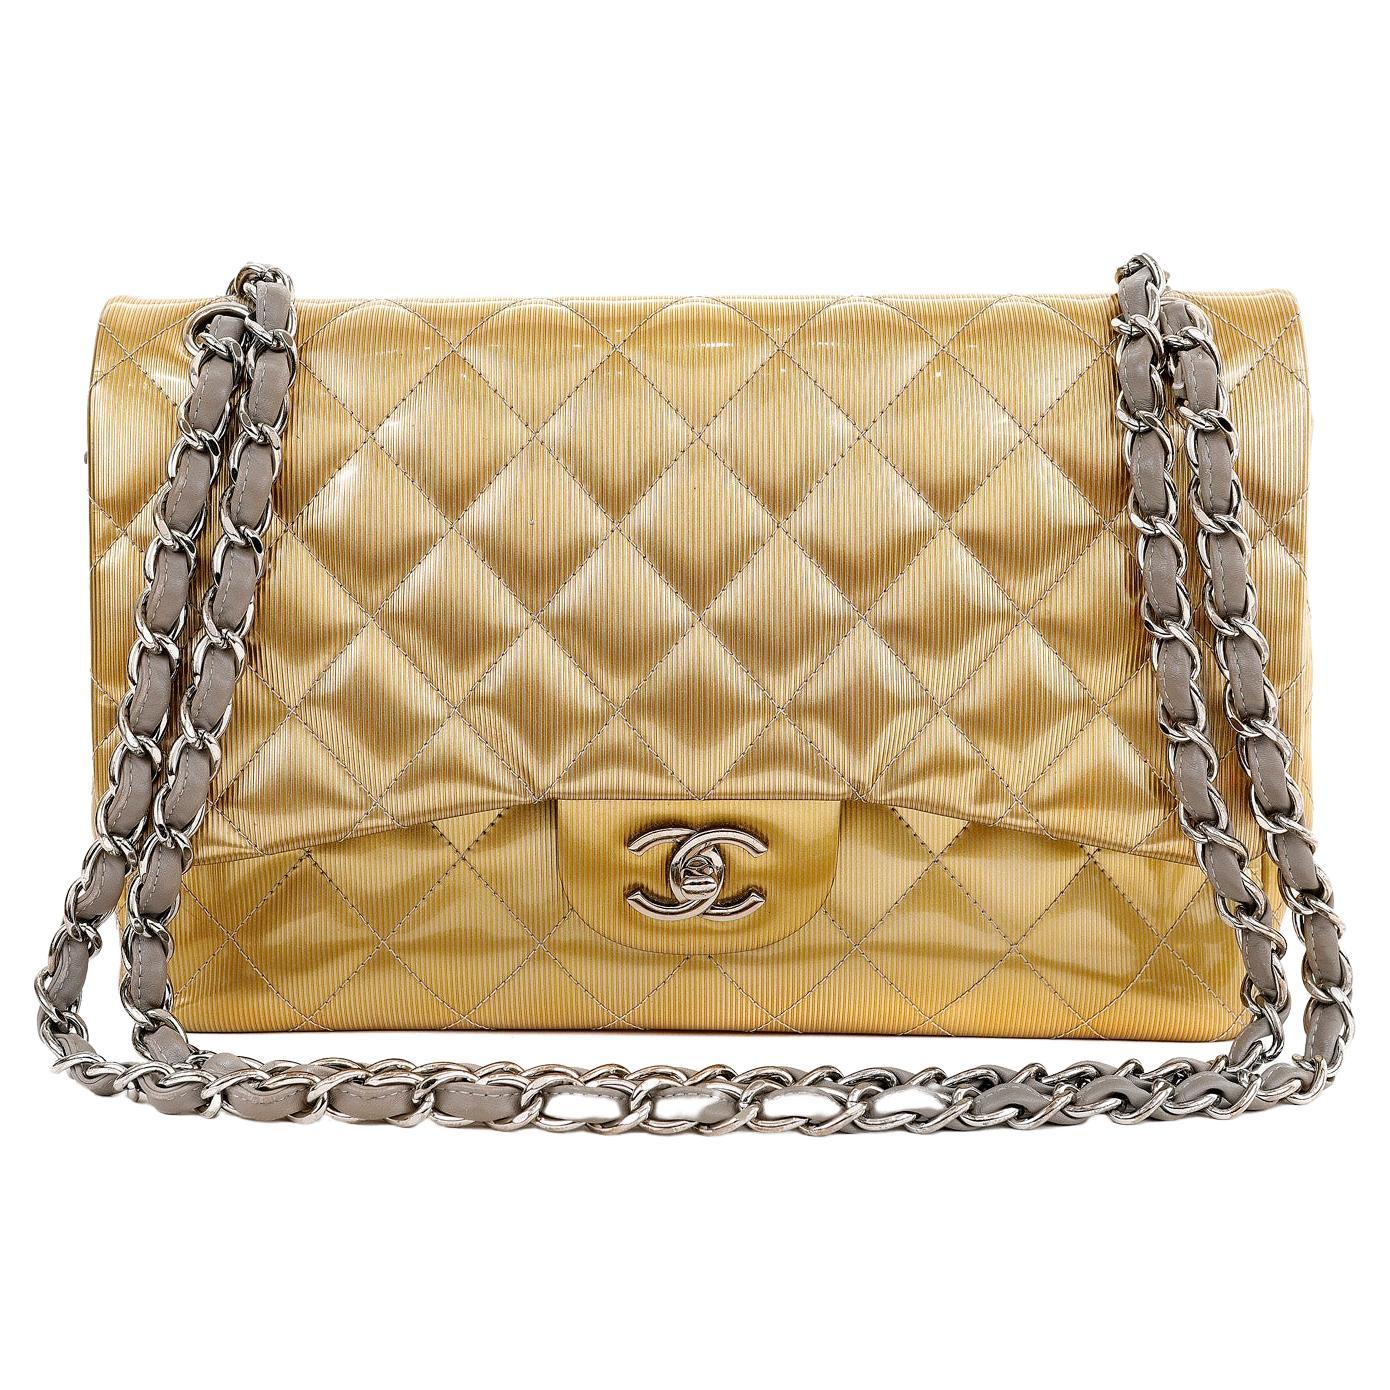 Chanel Gold Patent Leather Jumbo Classic Flap Bag For Sale